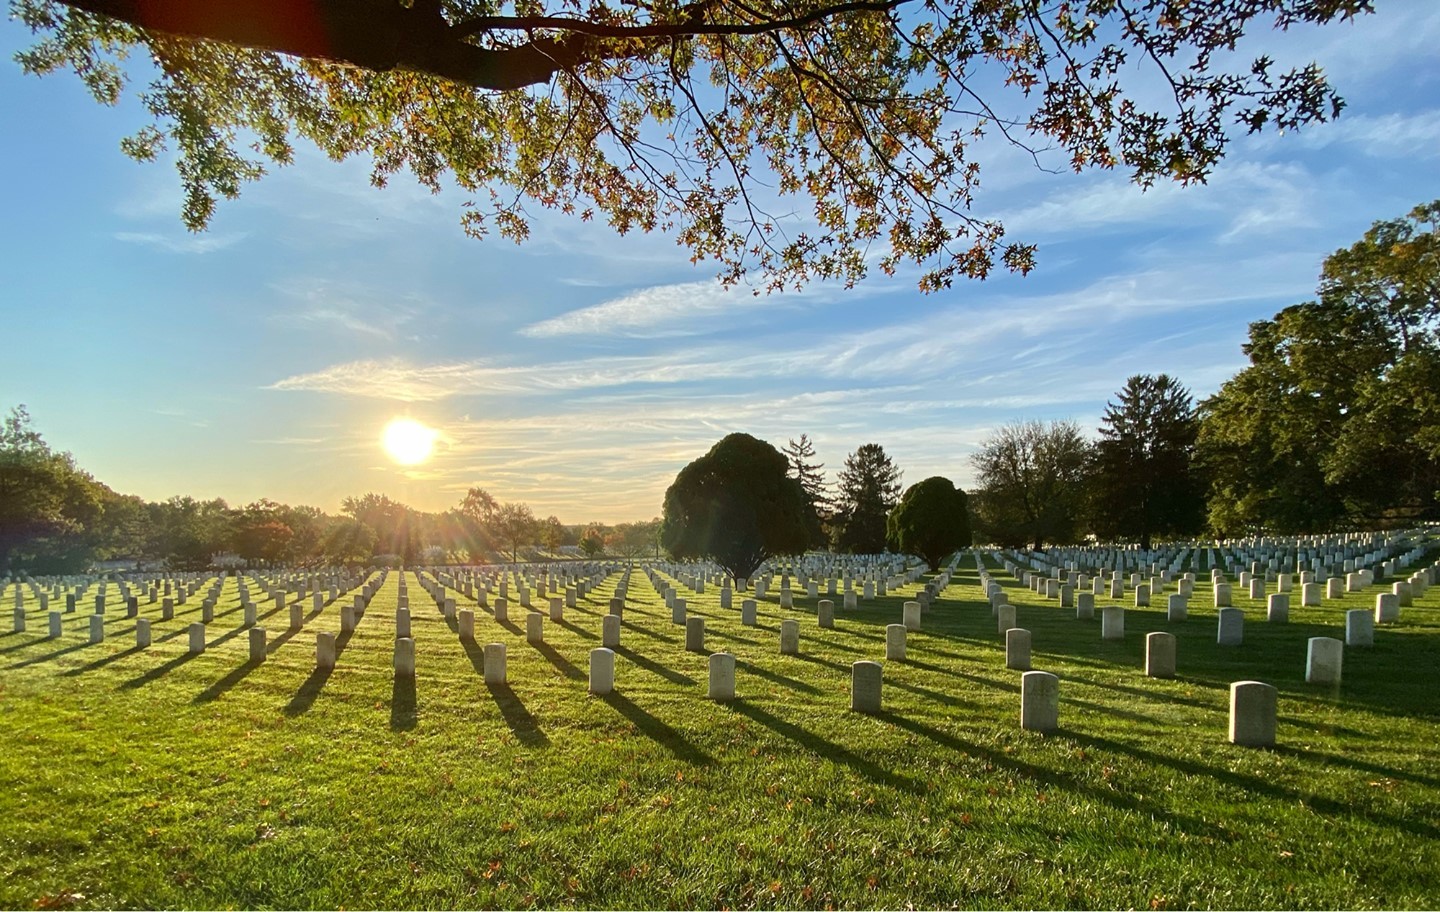 A sunrise over Arlington National Cemetery after a full week of services with Arlington Media.